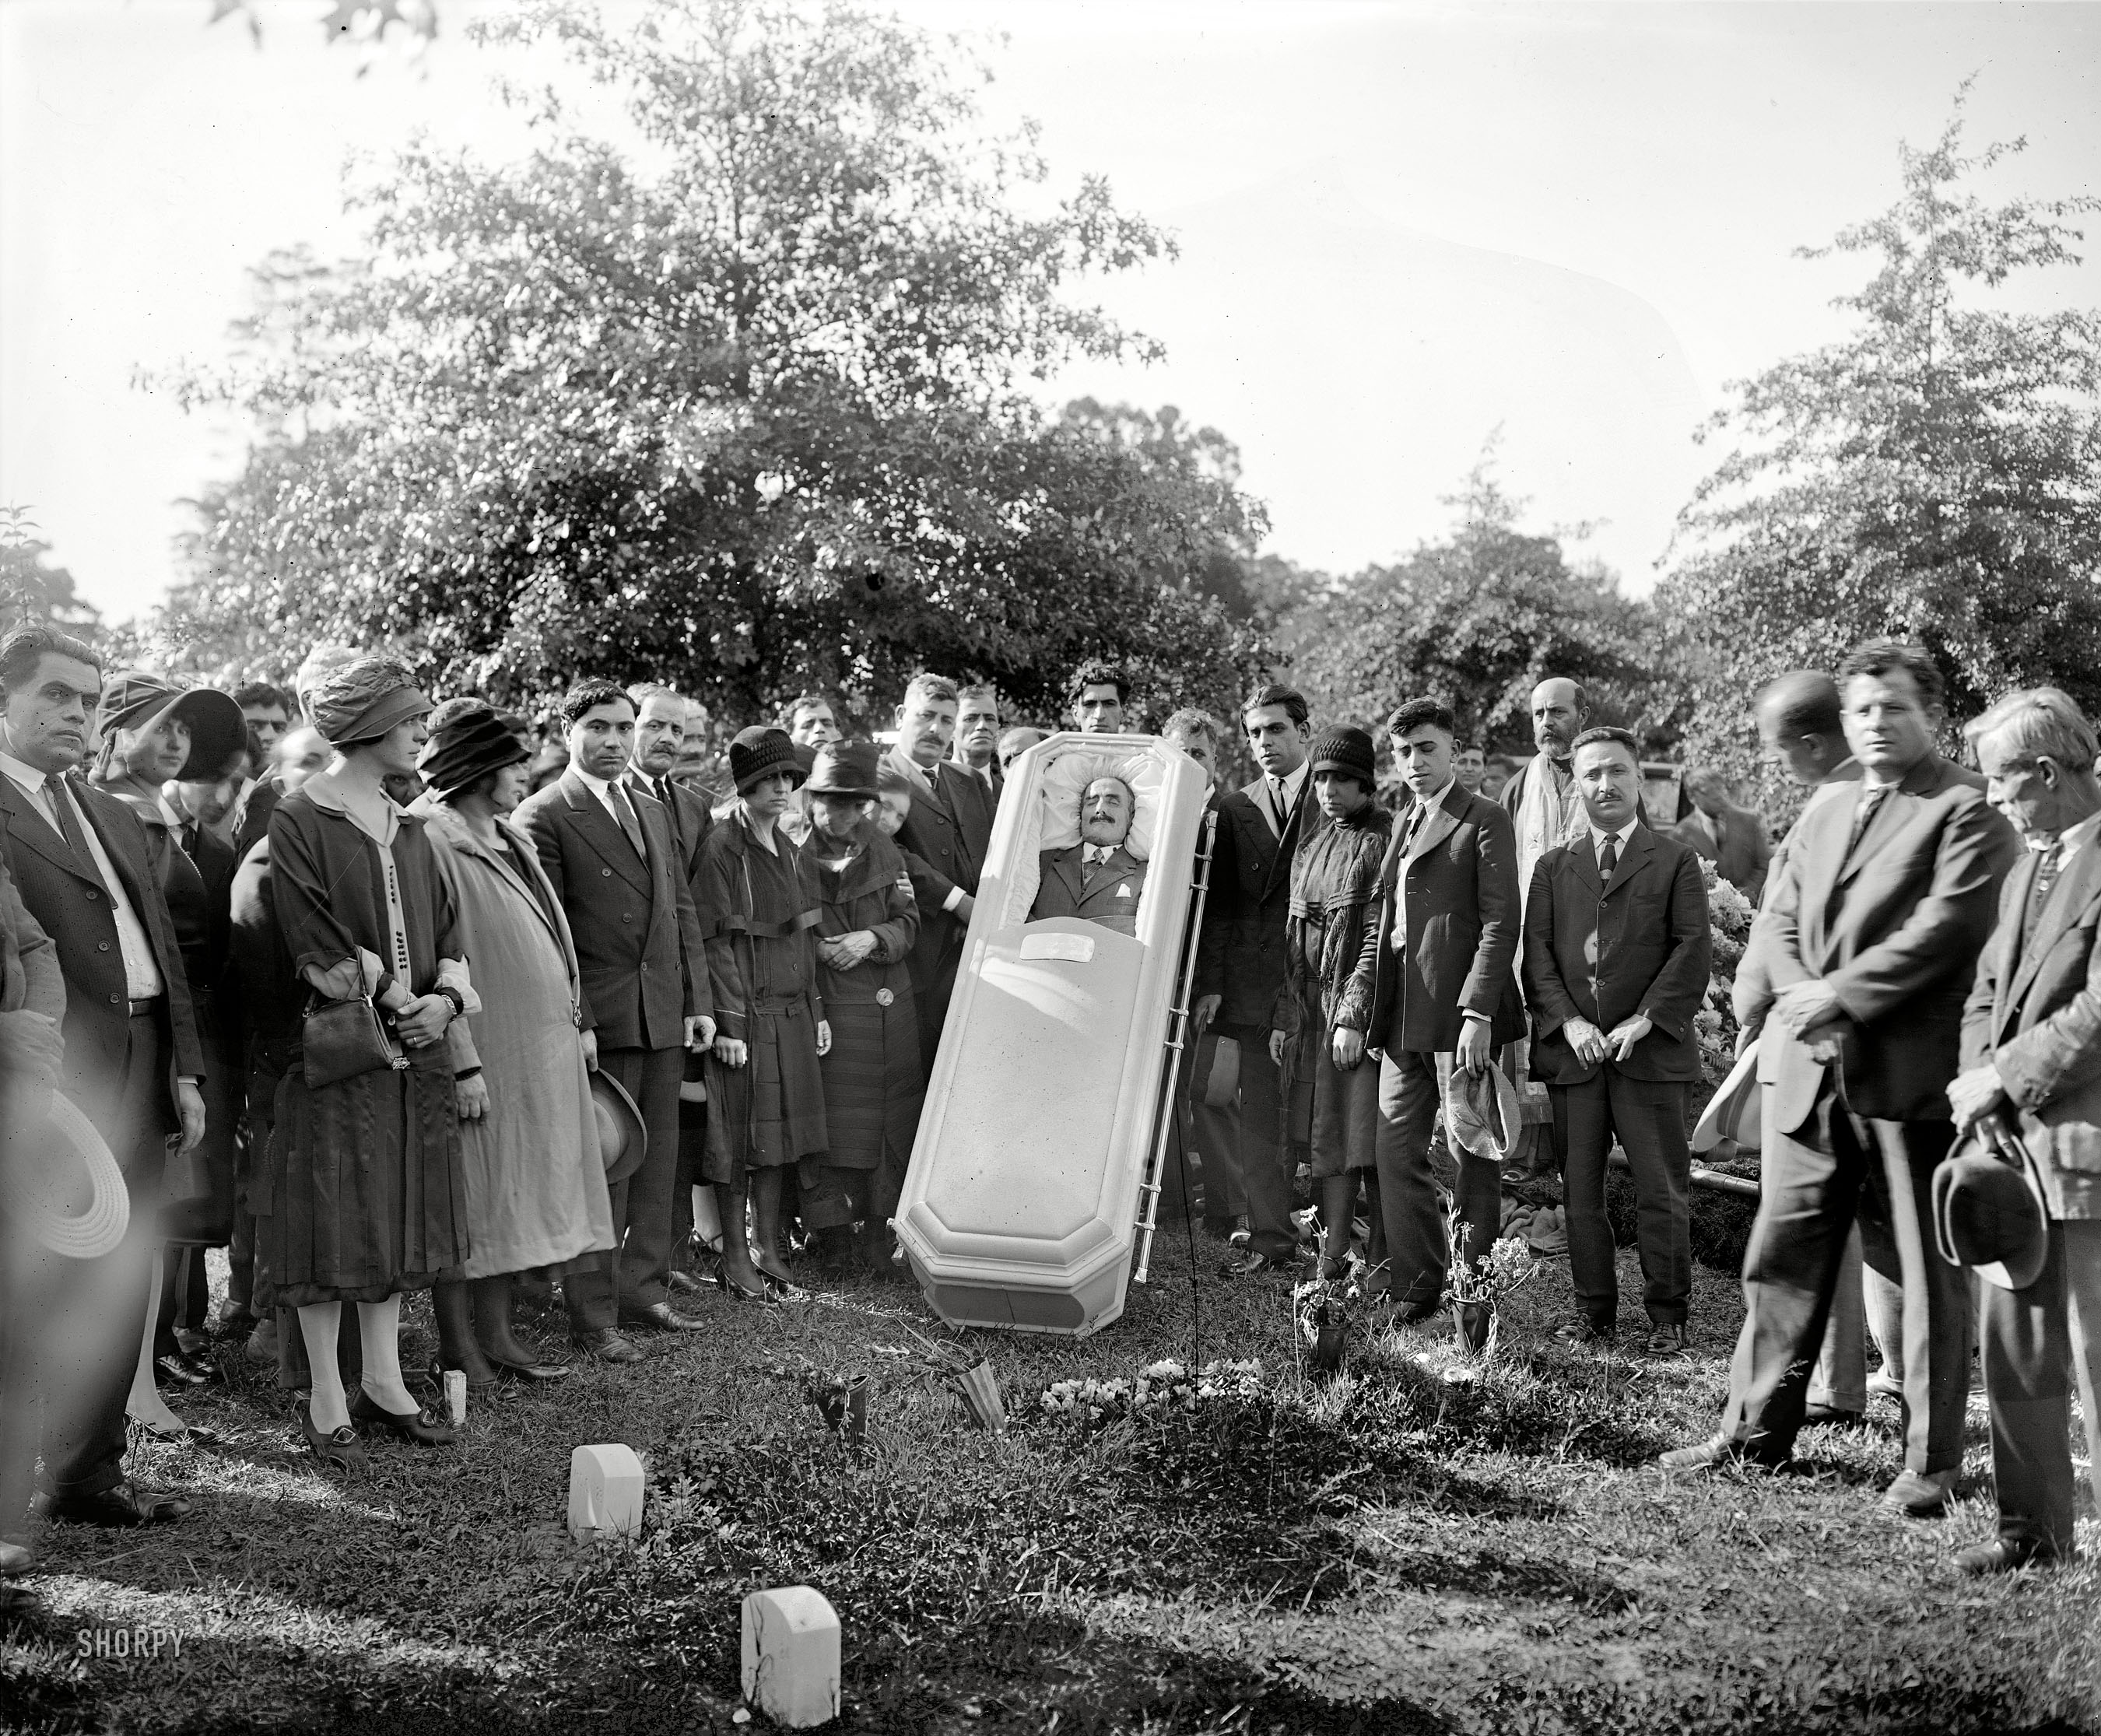 Washington, D.C., or vicinity circa 1925. "No. 89 -- Cemetery picture -- No name." One last look around topside. National Photo glass negative. View full size.